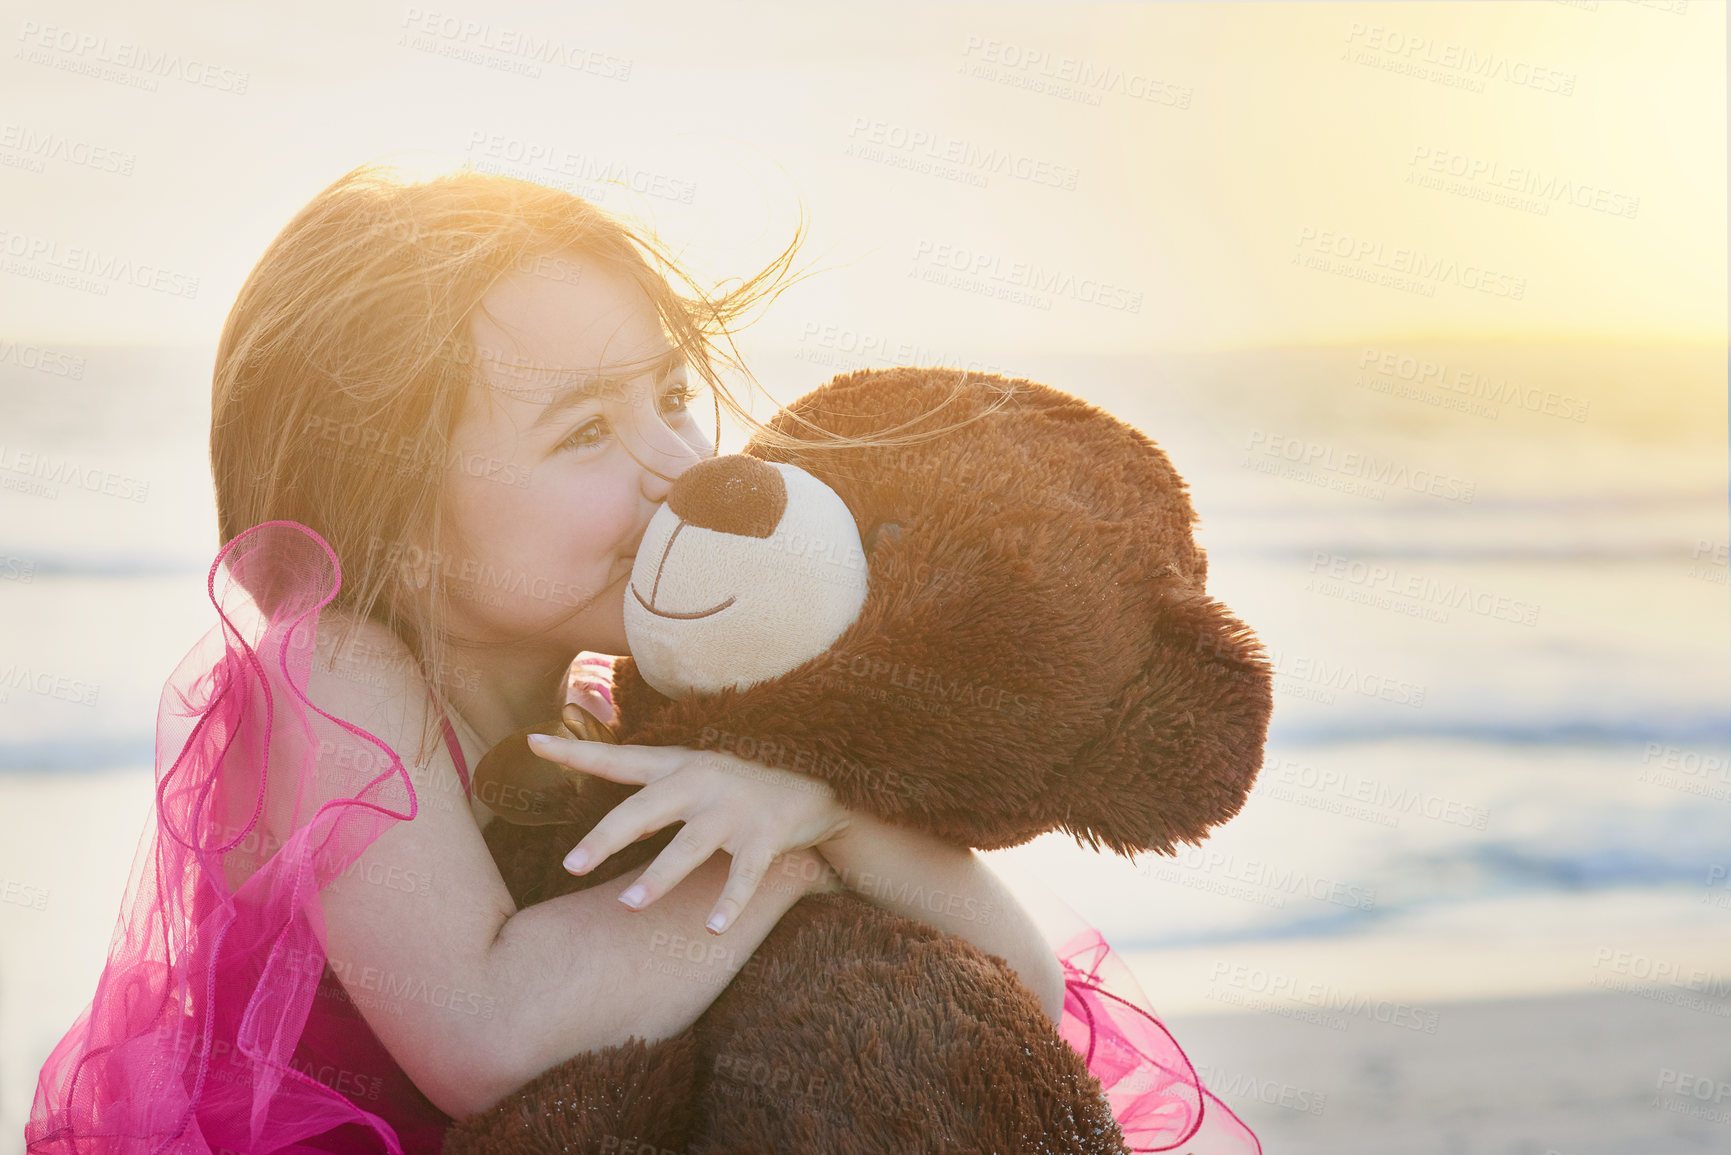 Buy stock photo Portrait of a cute little girl playing with her teddy bear on the beach